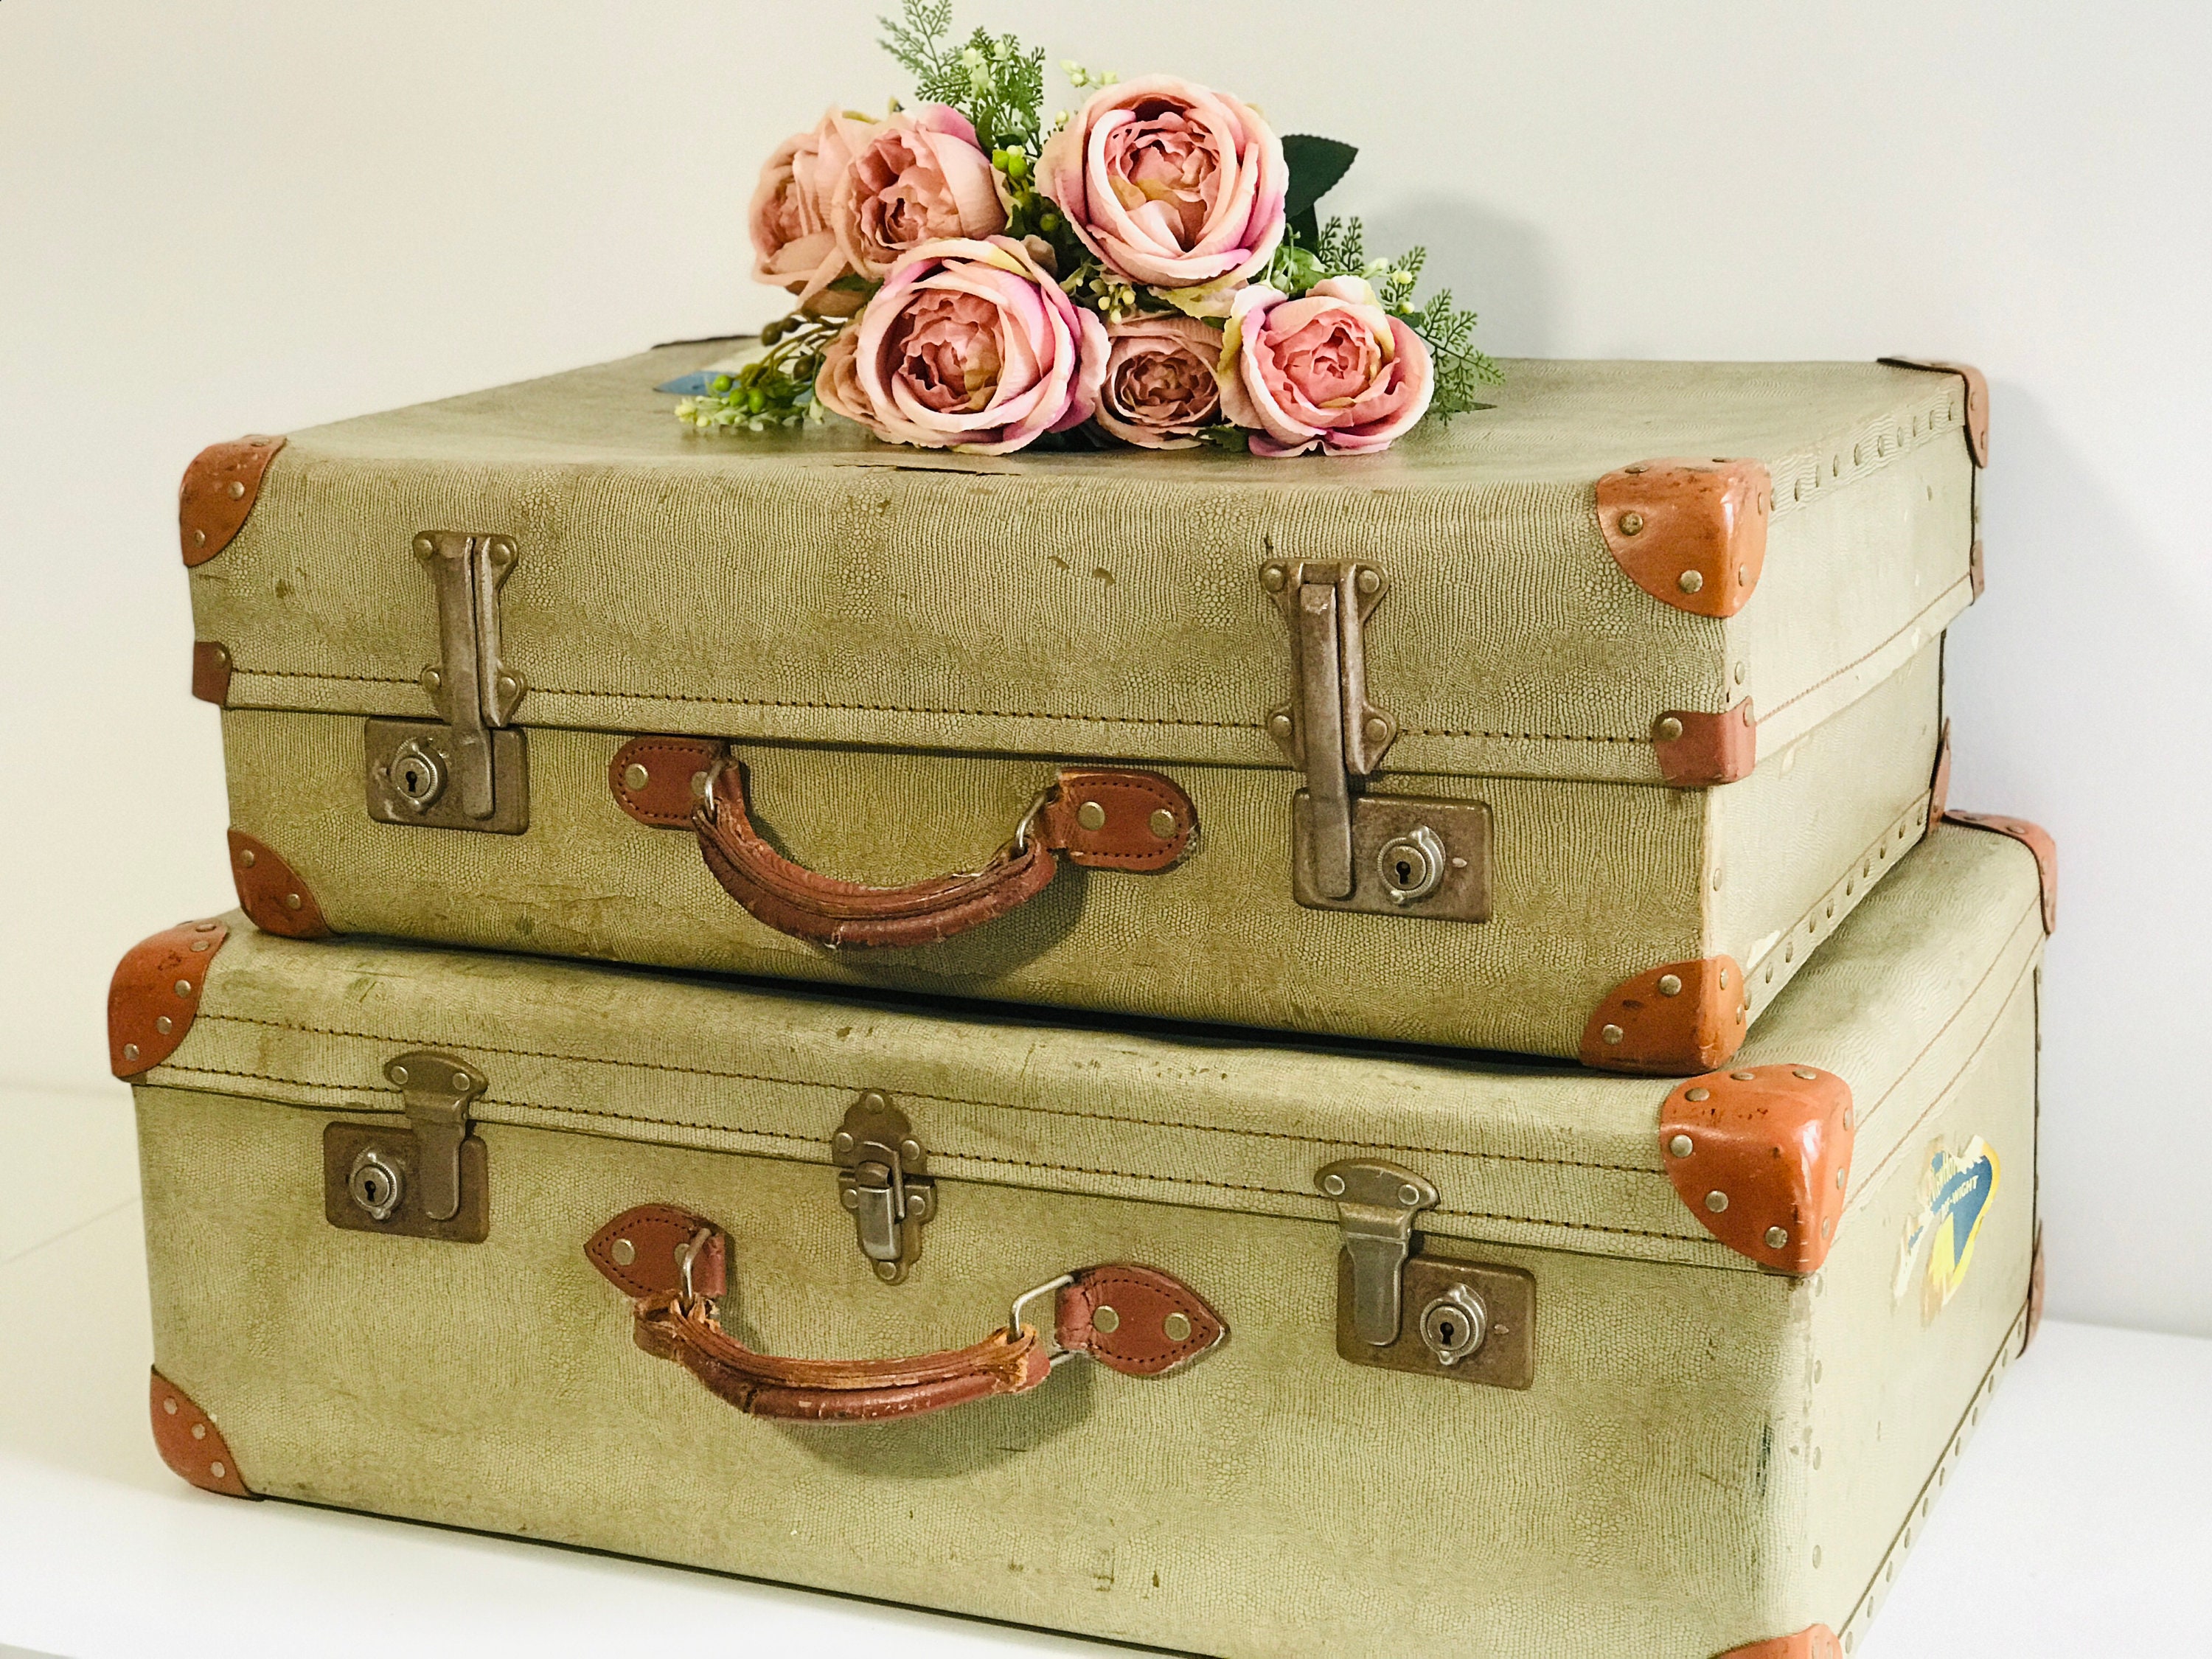 Set of 1930s Vintage Suitcases with Brown Tan Trim and Handles